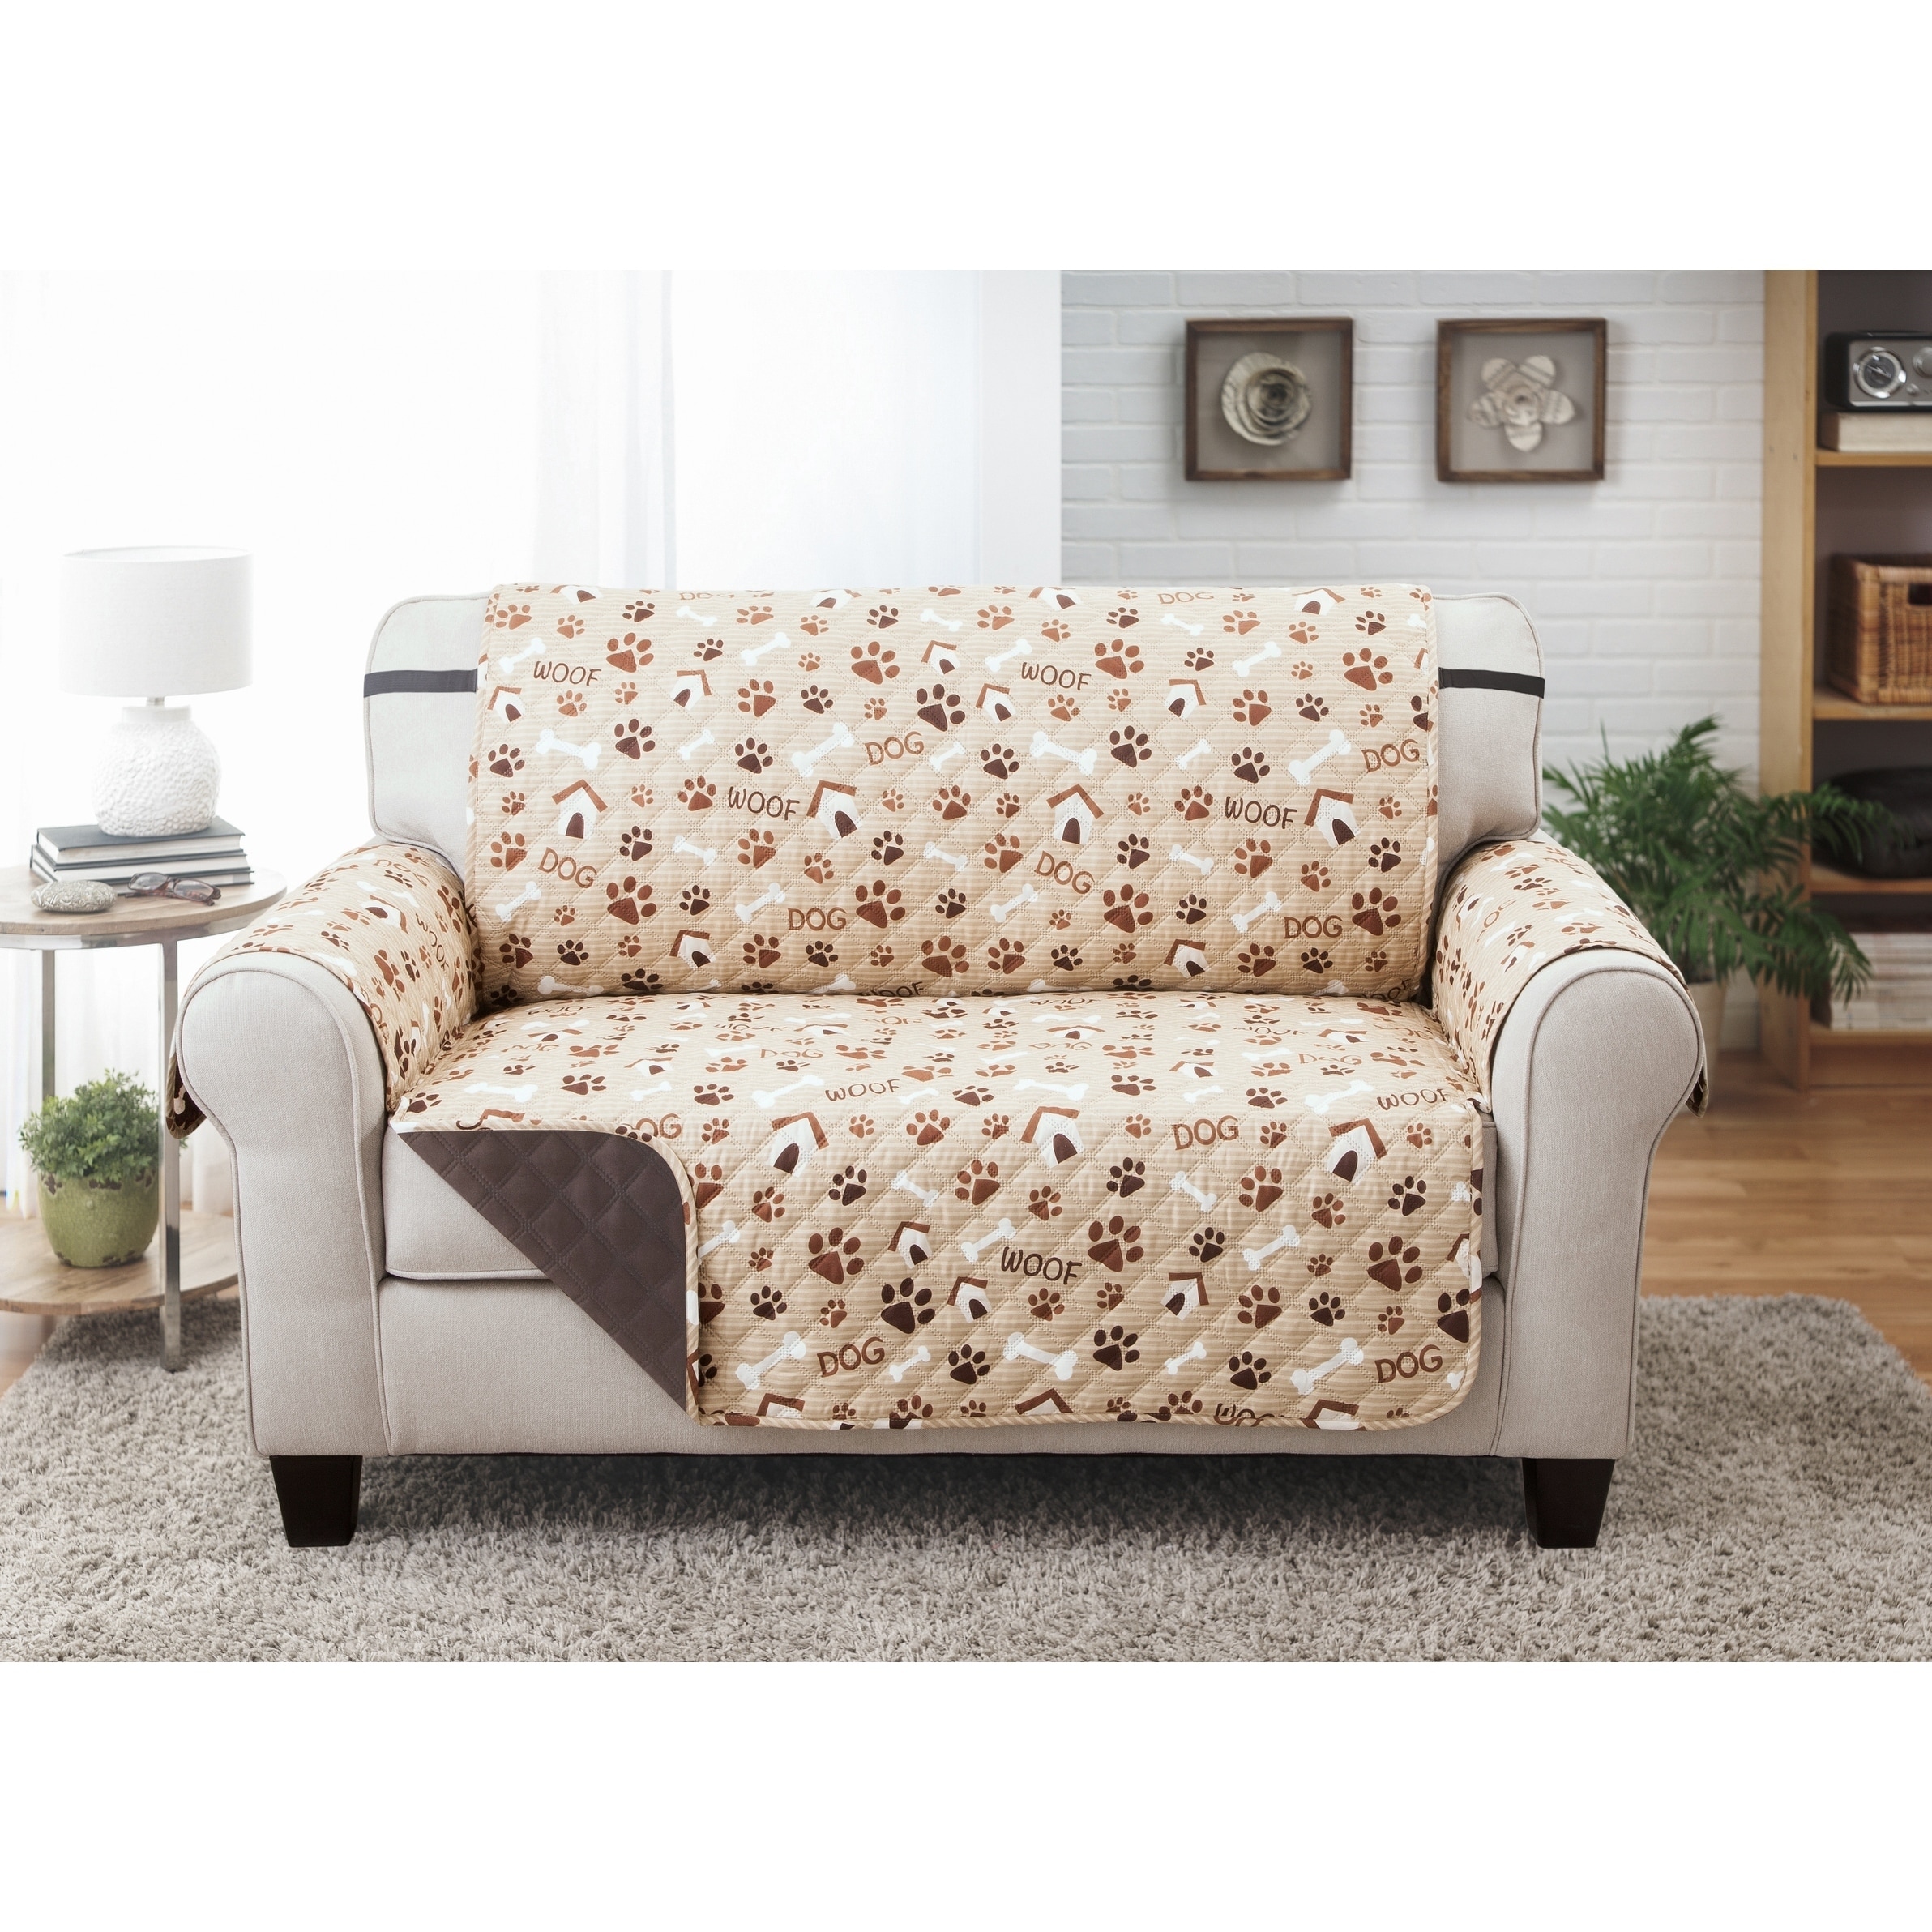 DELUXE REVERSIBLE PED DOG LOVESEAT FURNITURE PROTECTOR QUILTED COVER Red Tan 